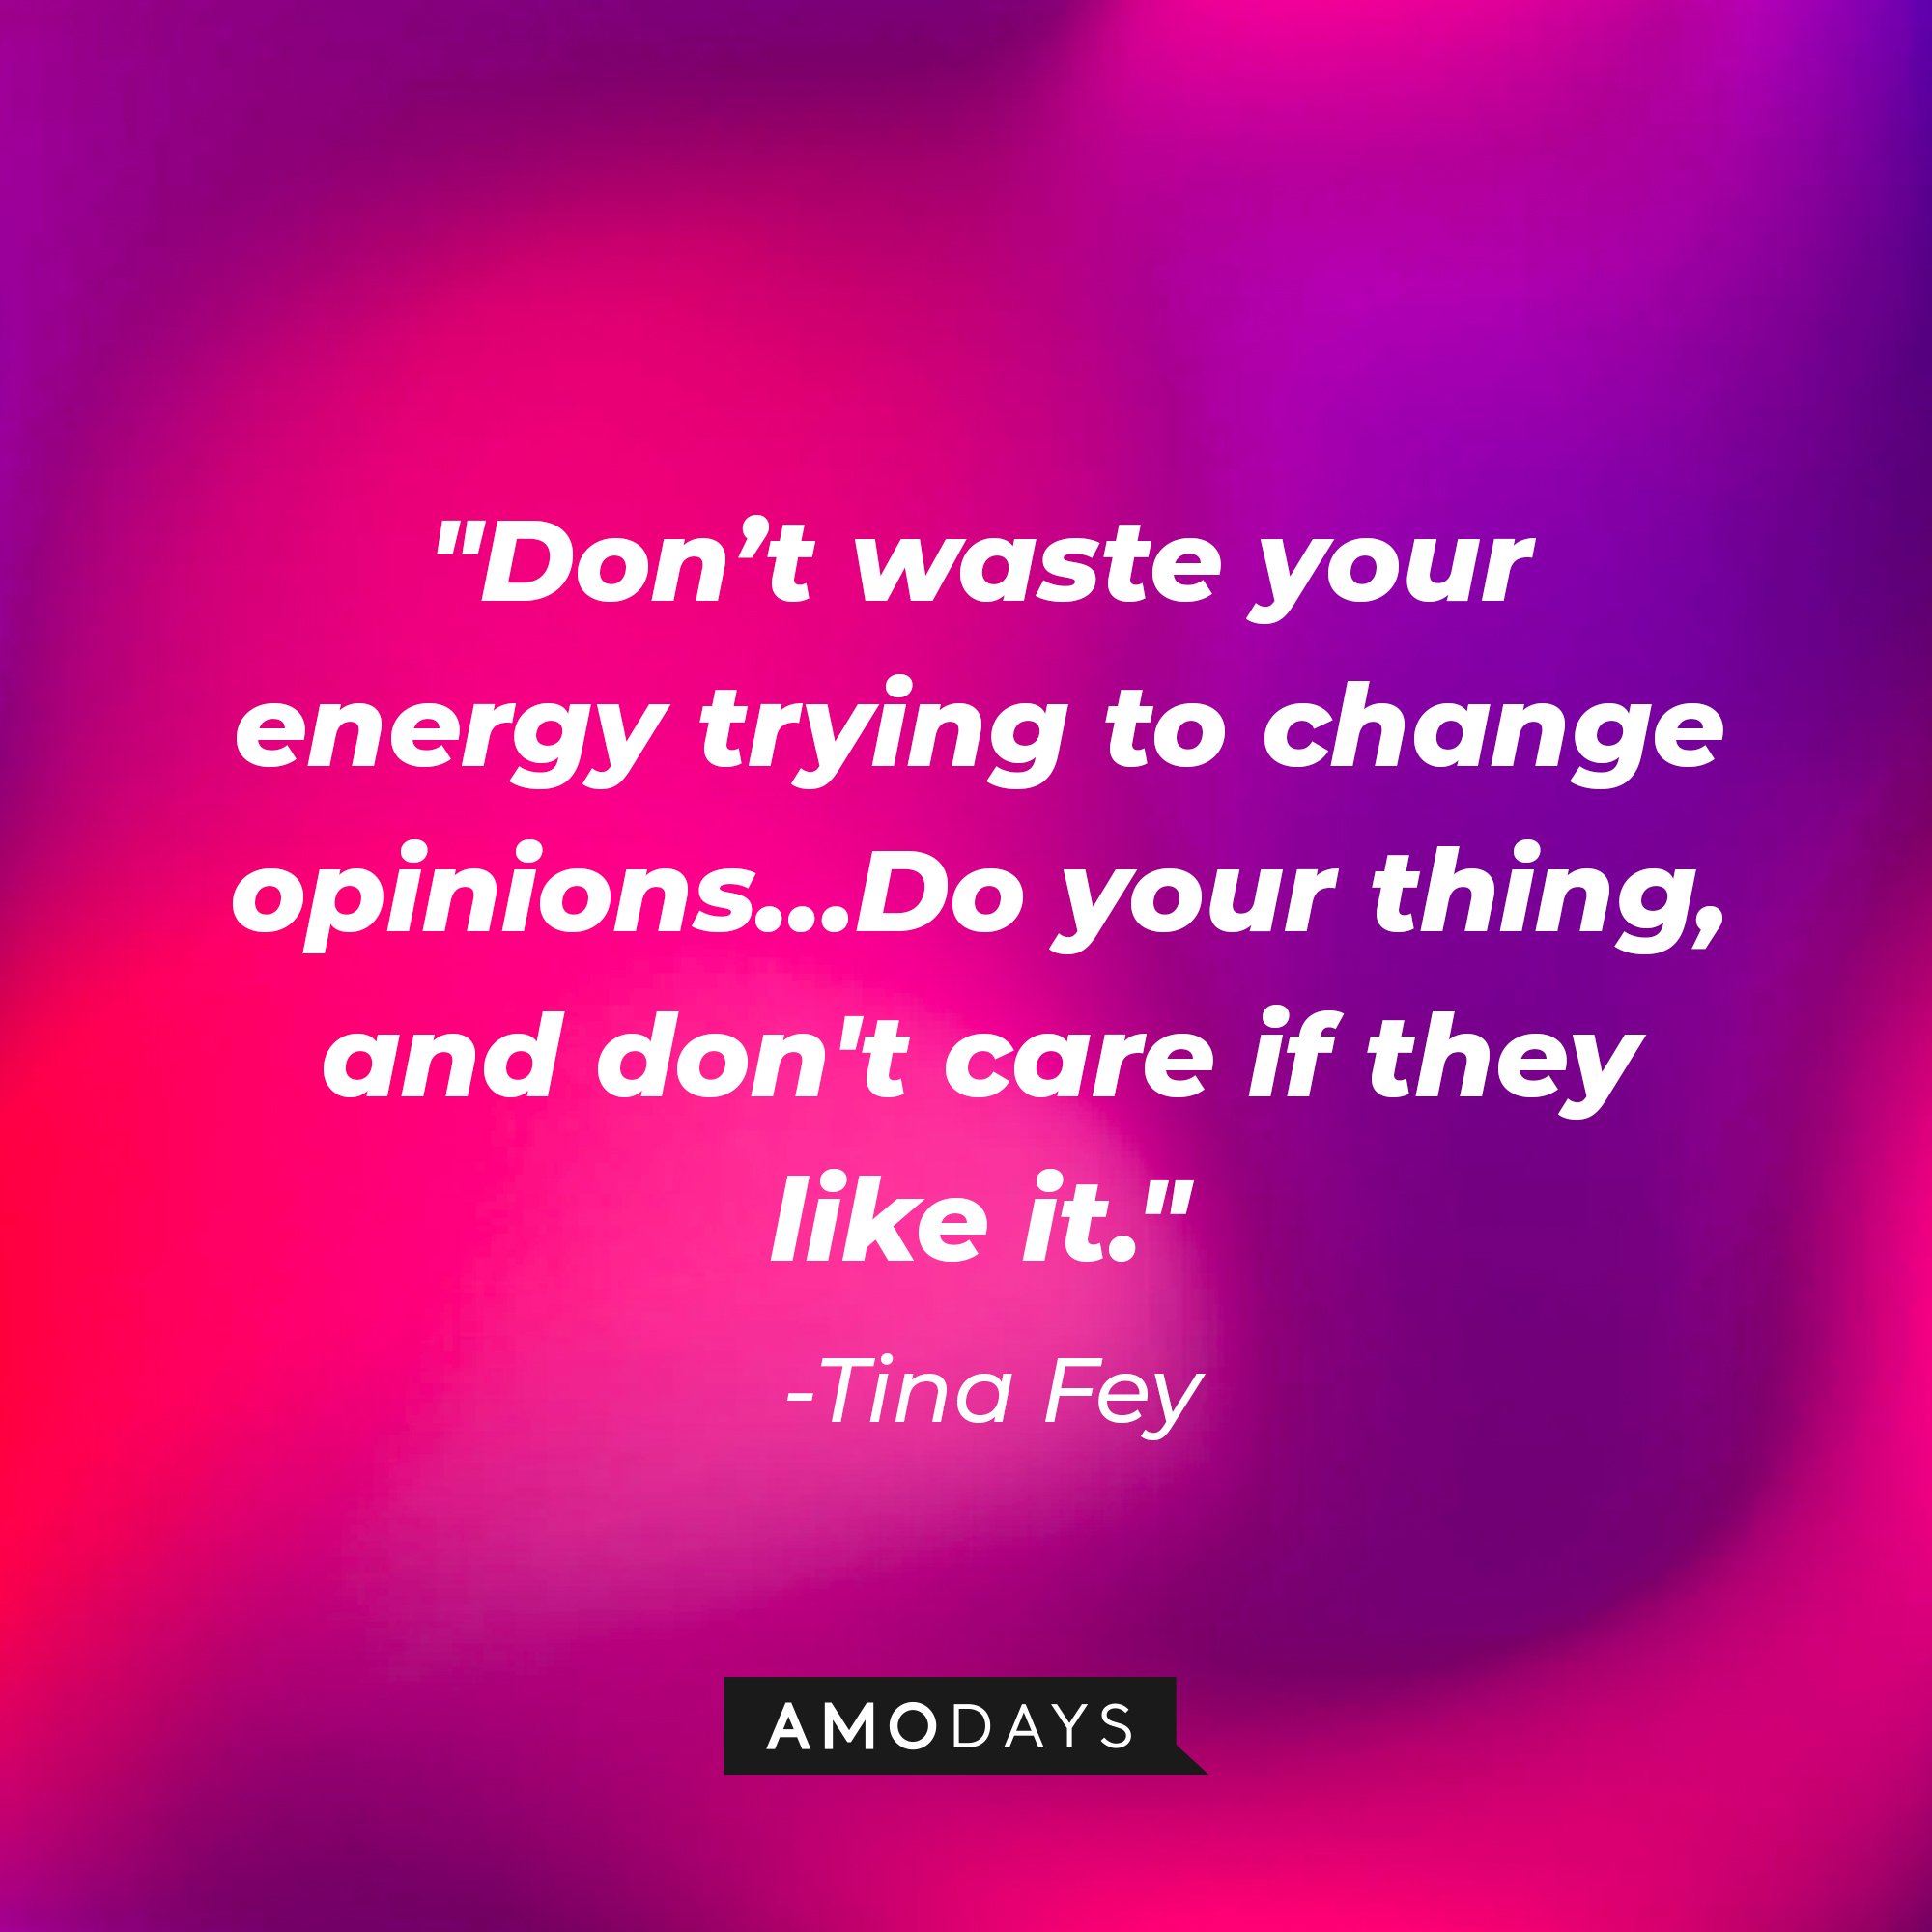 Tina Fey's quote: "Don’t waste your energy trying to change opinions … Do your thing, and don't care if they like it." | Image: AmoDays